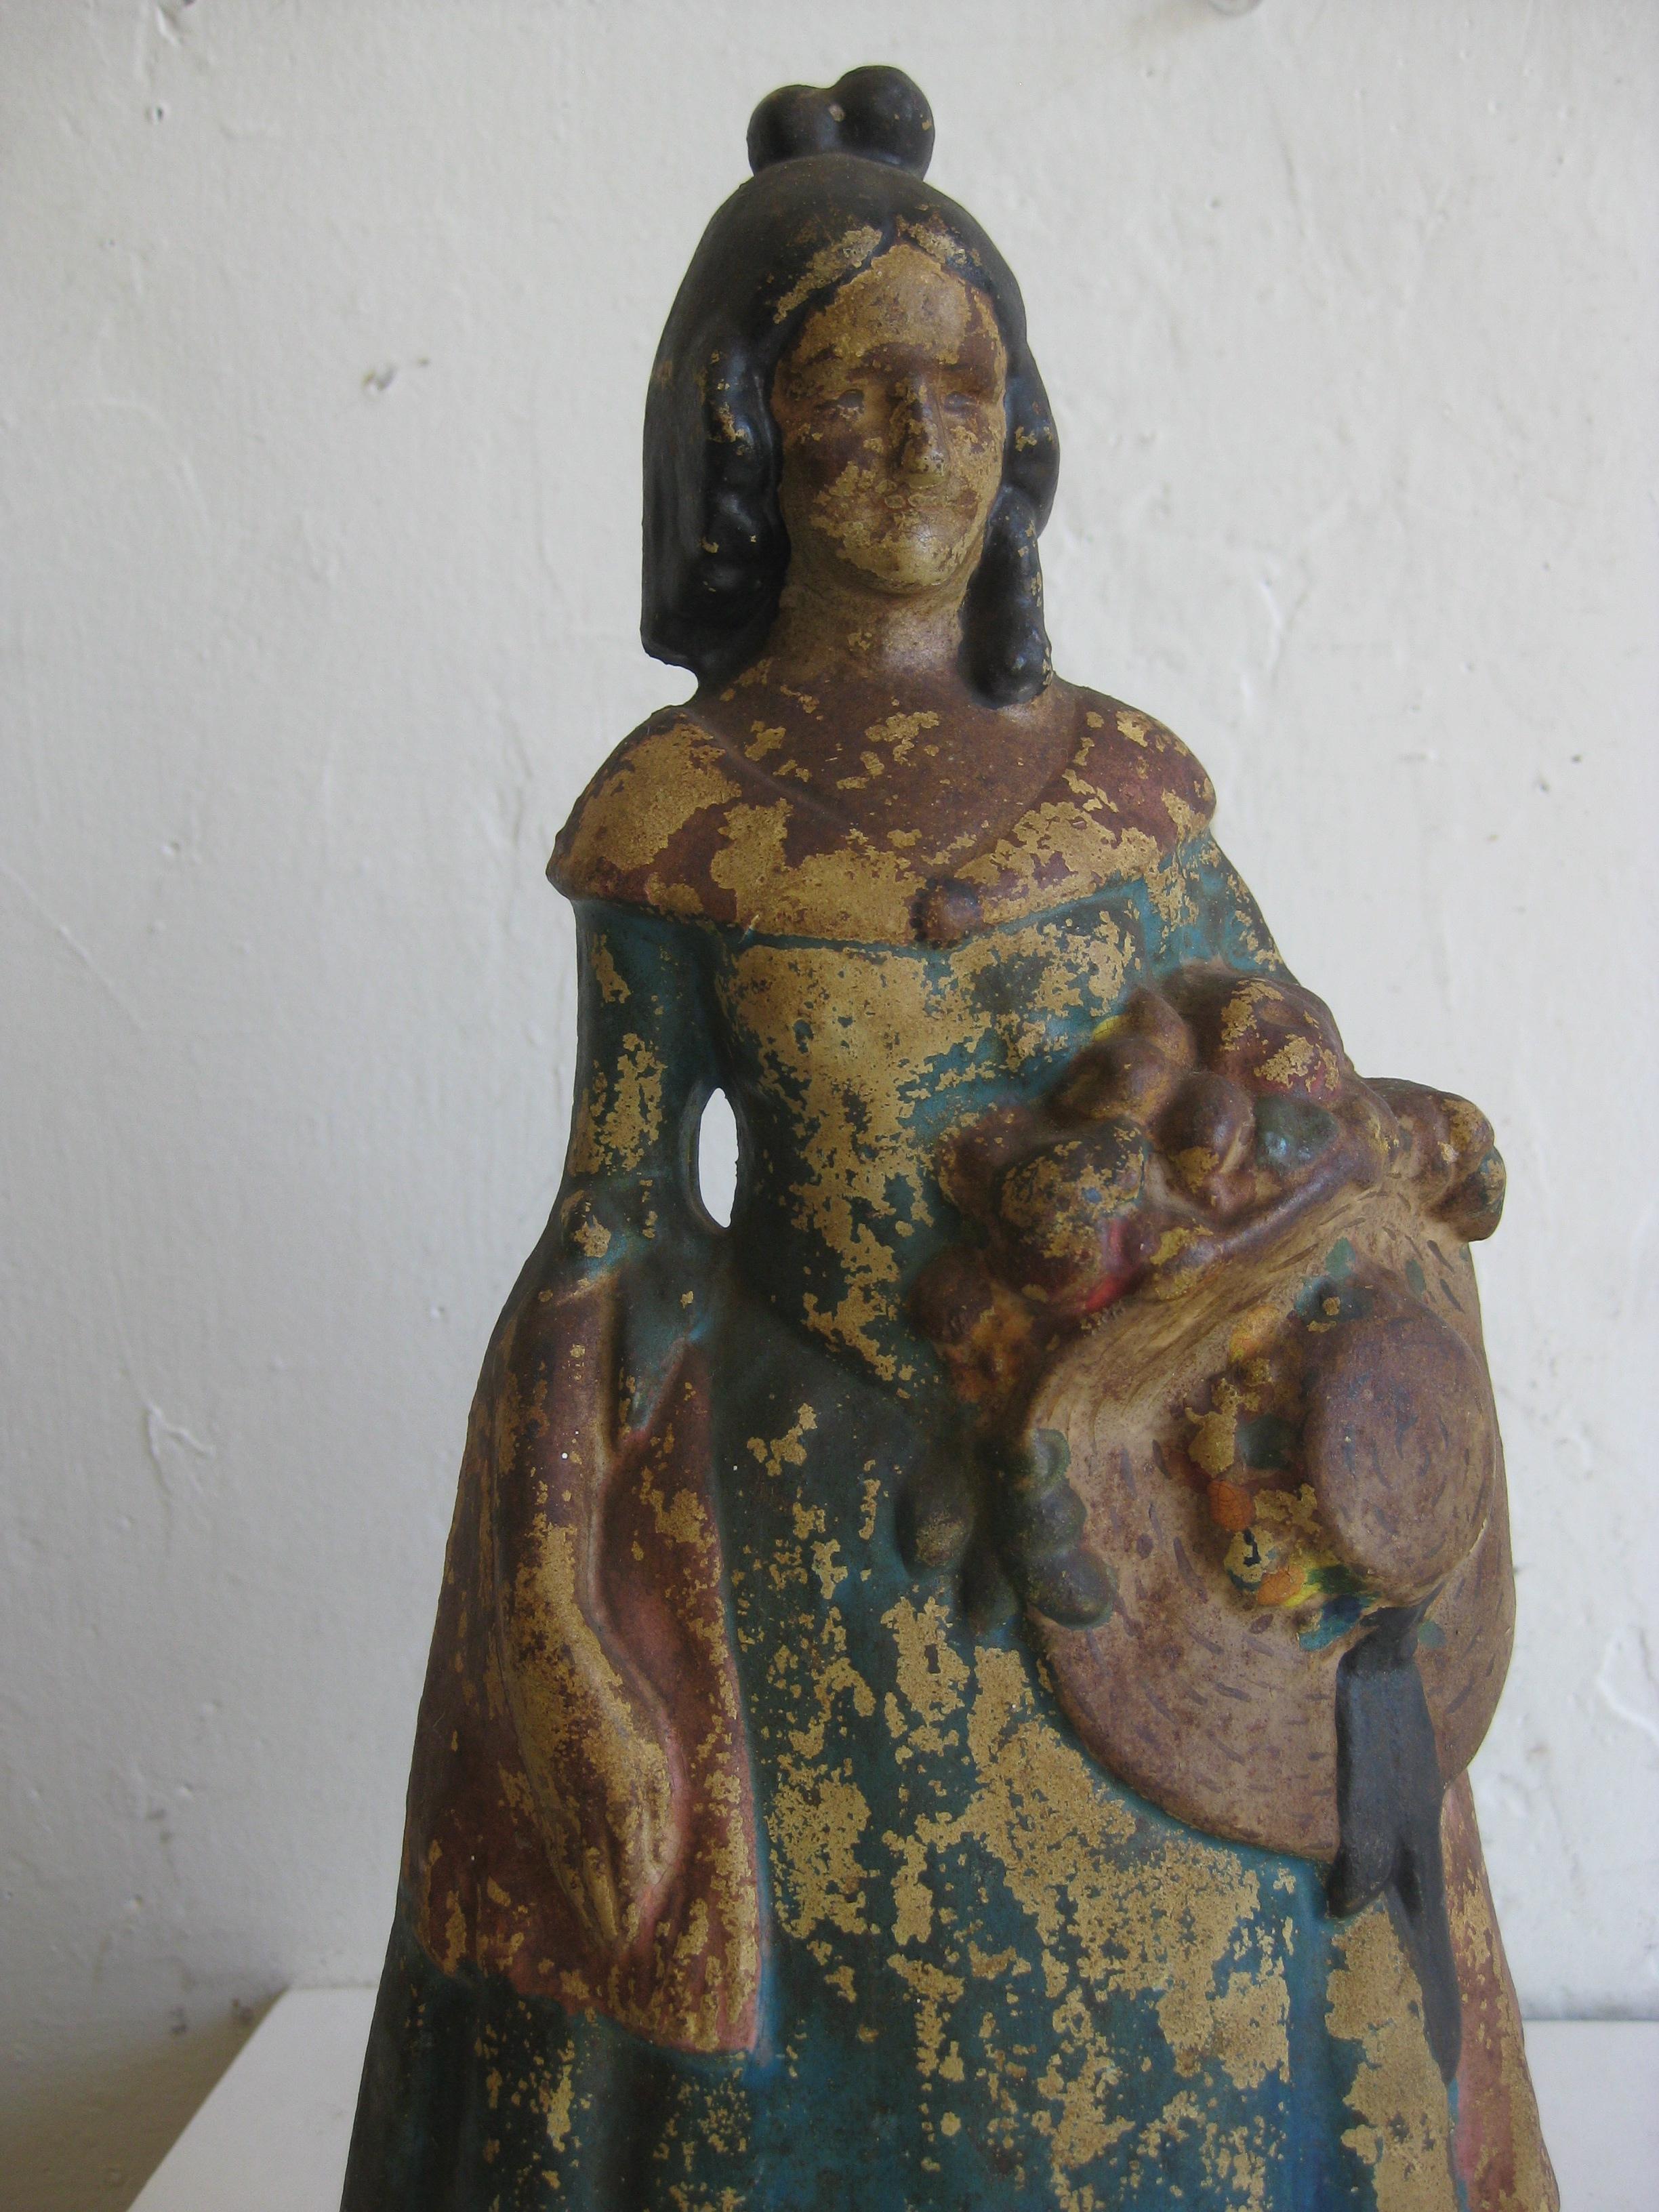 Great original Victorian era Folk Art cast iron hand painted polychrome figural lady doorstop. Dates from the late 1800s. Features a woman holding a straw hat. Has the remains of the original paint. Great patina and displays well. No cracks or